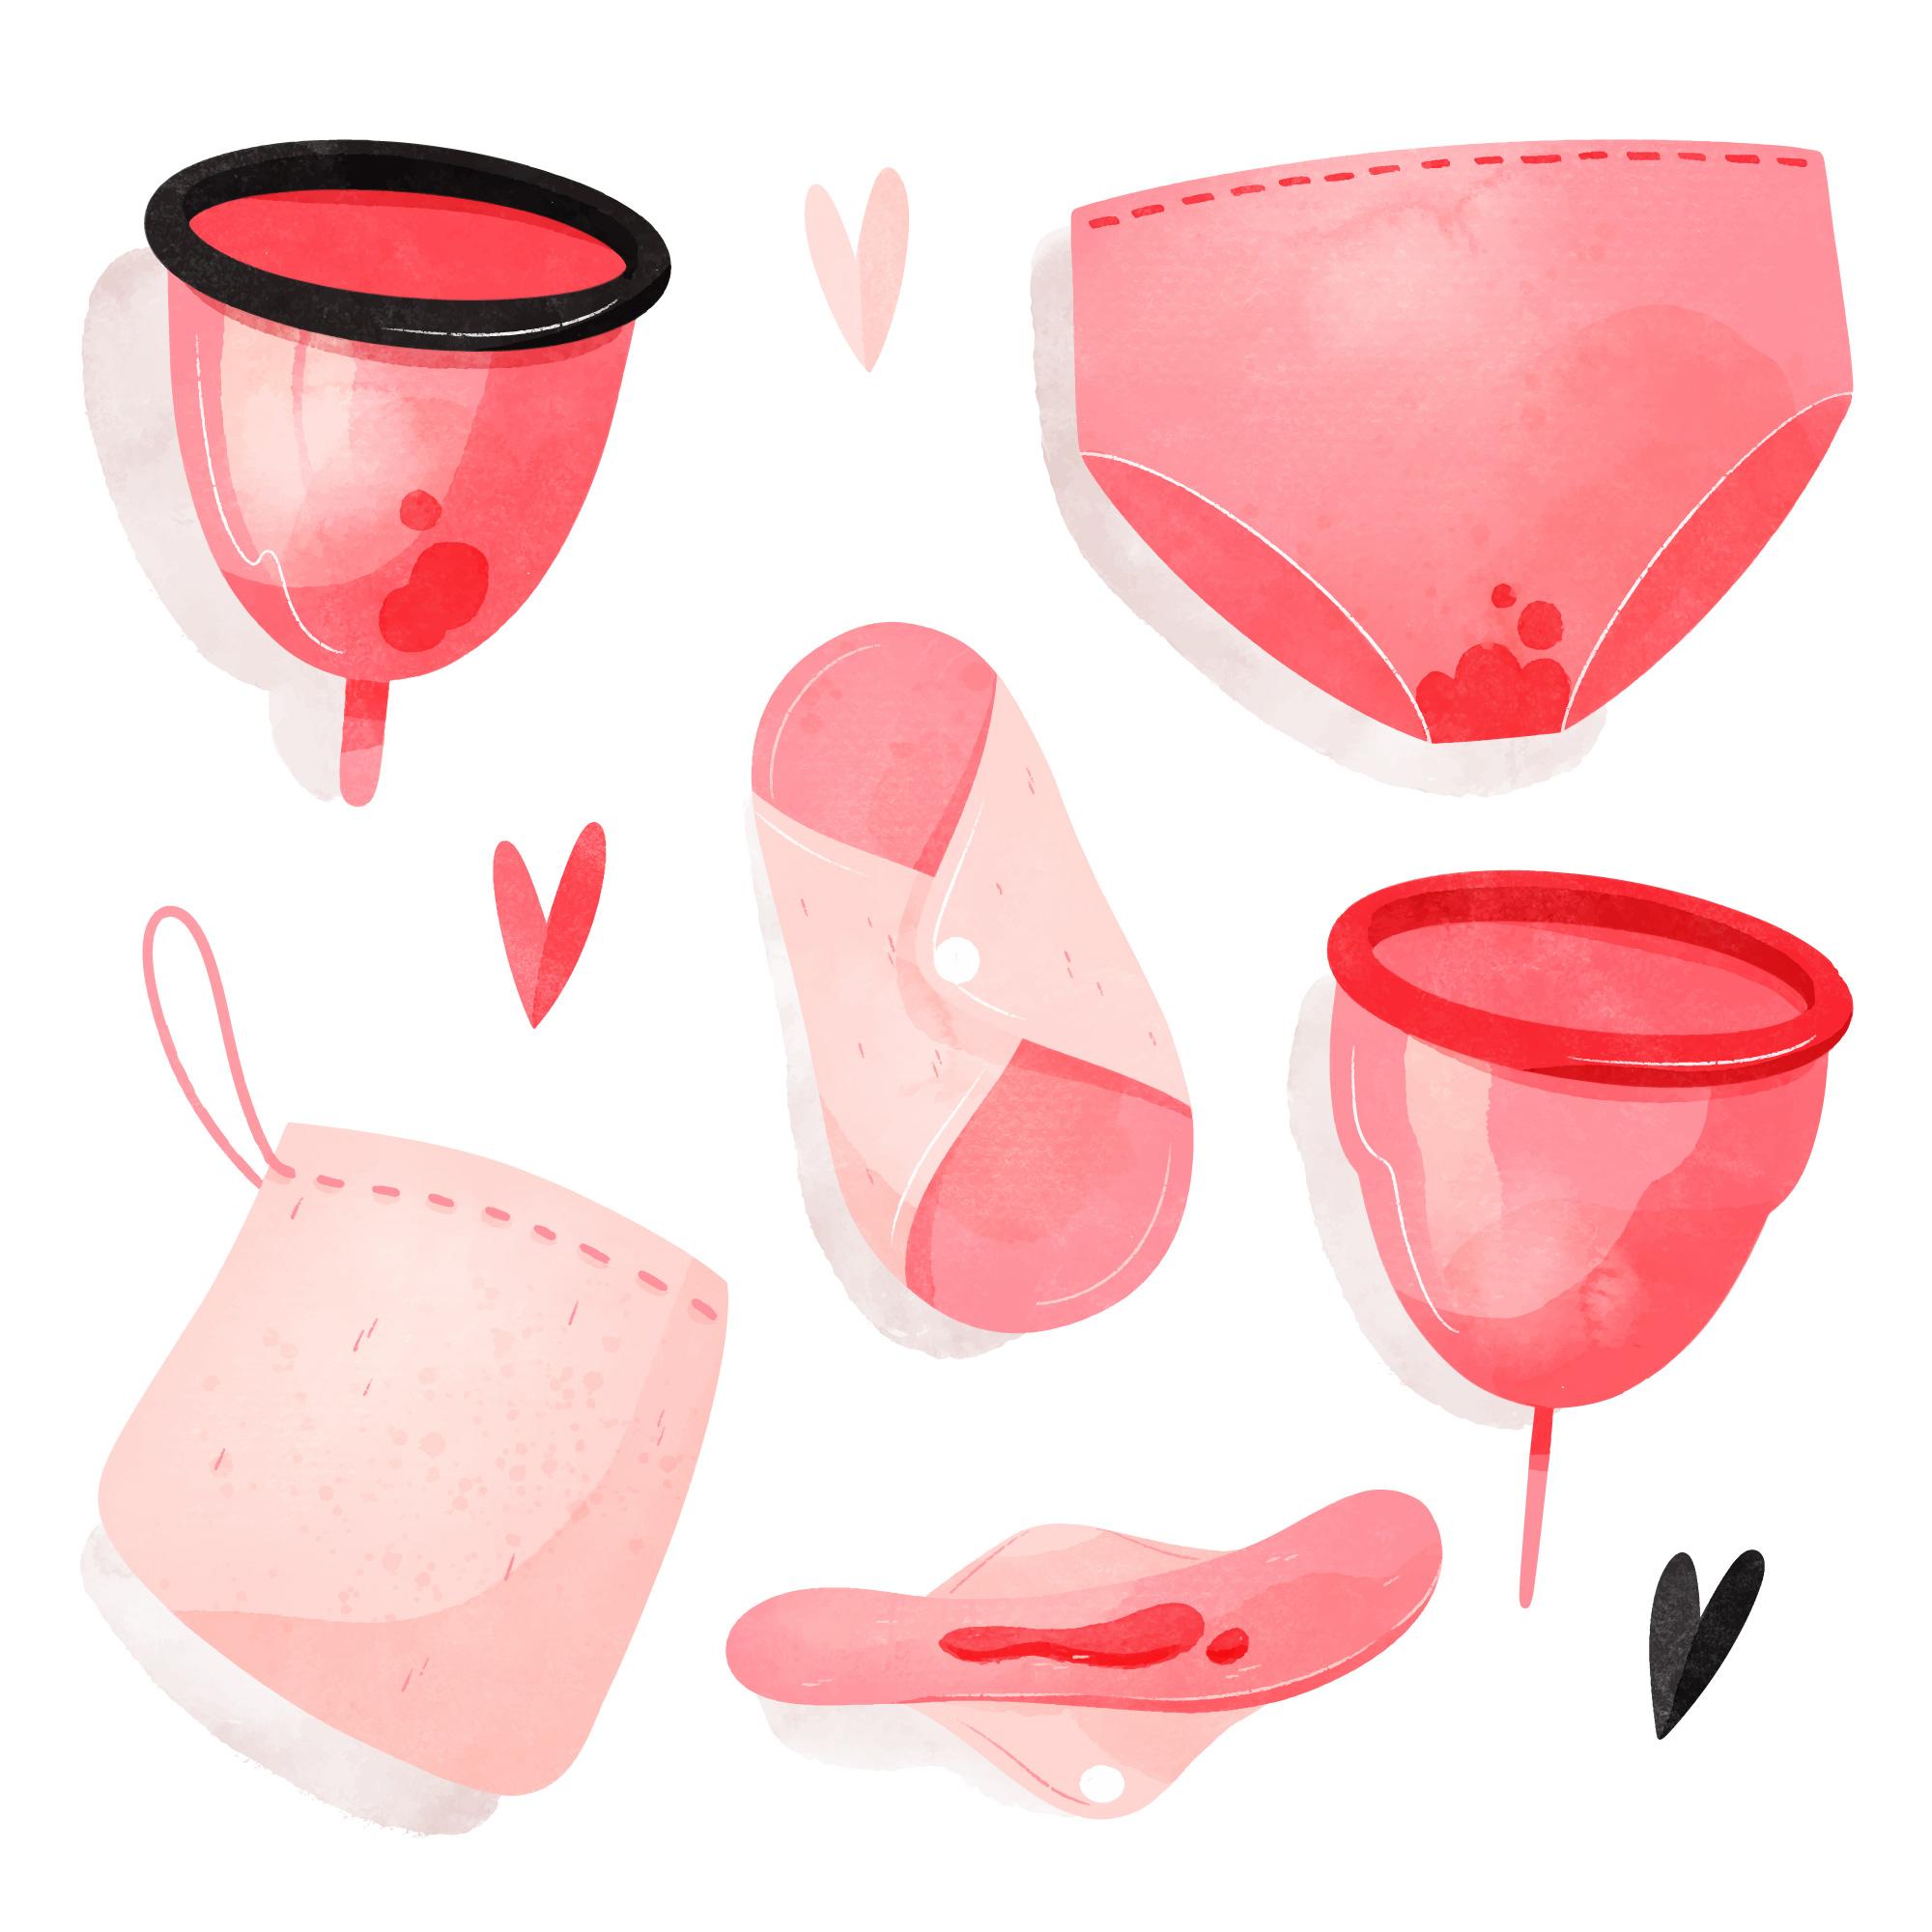 How to use a menstrual bowl?